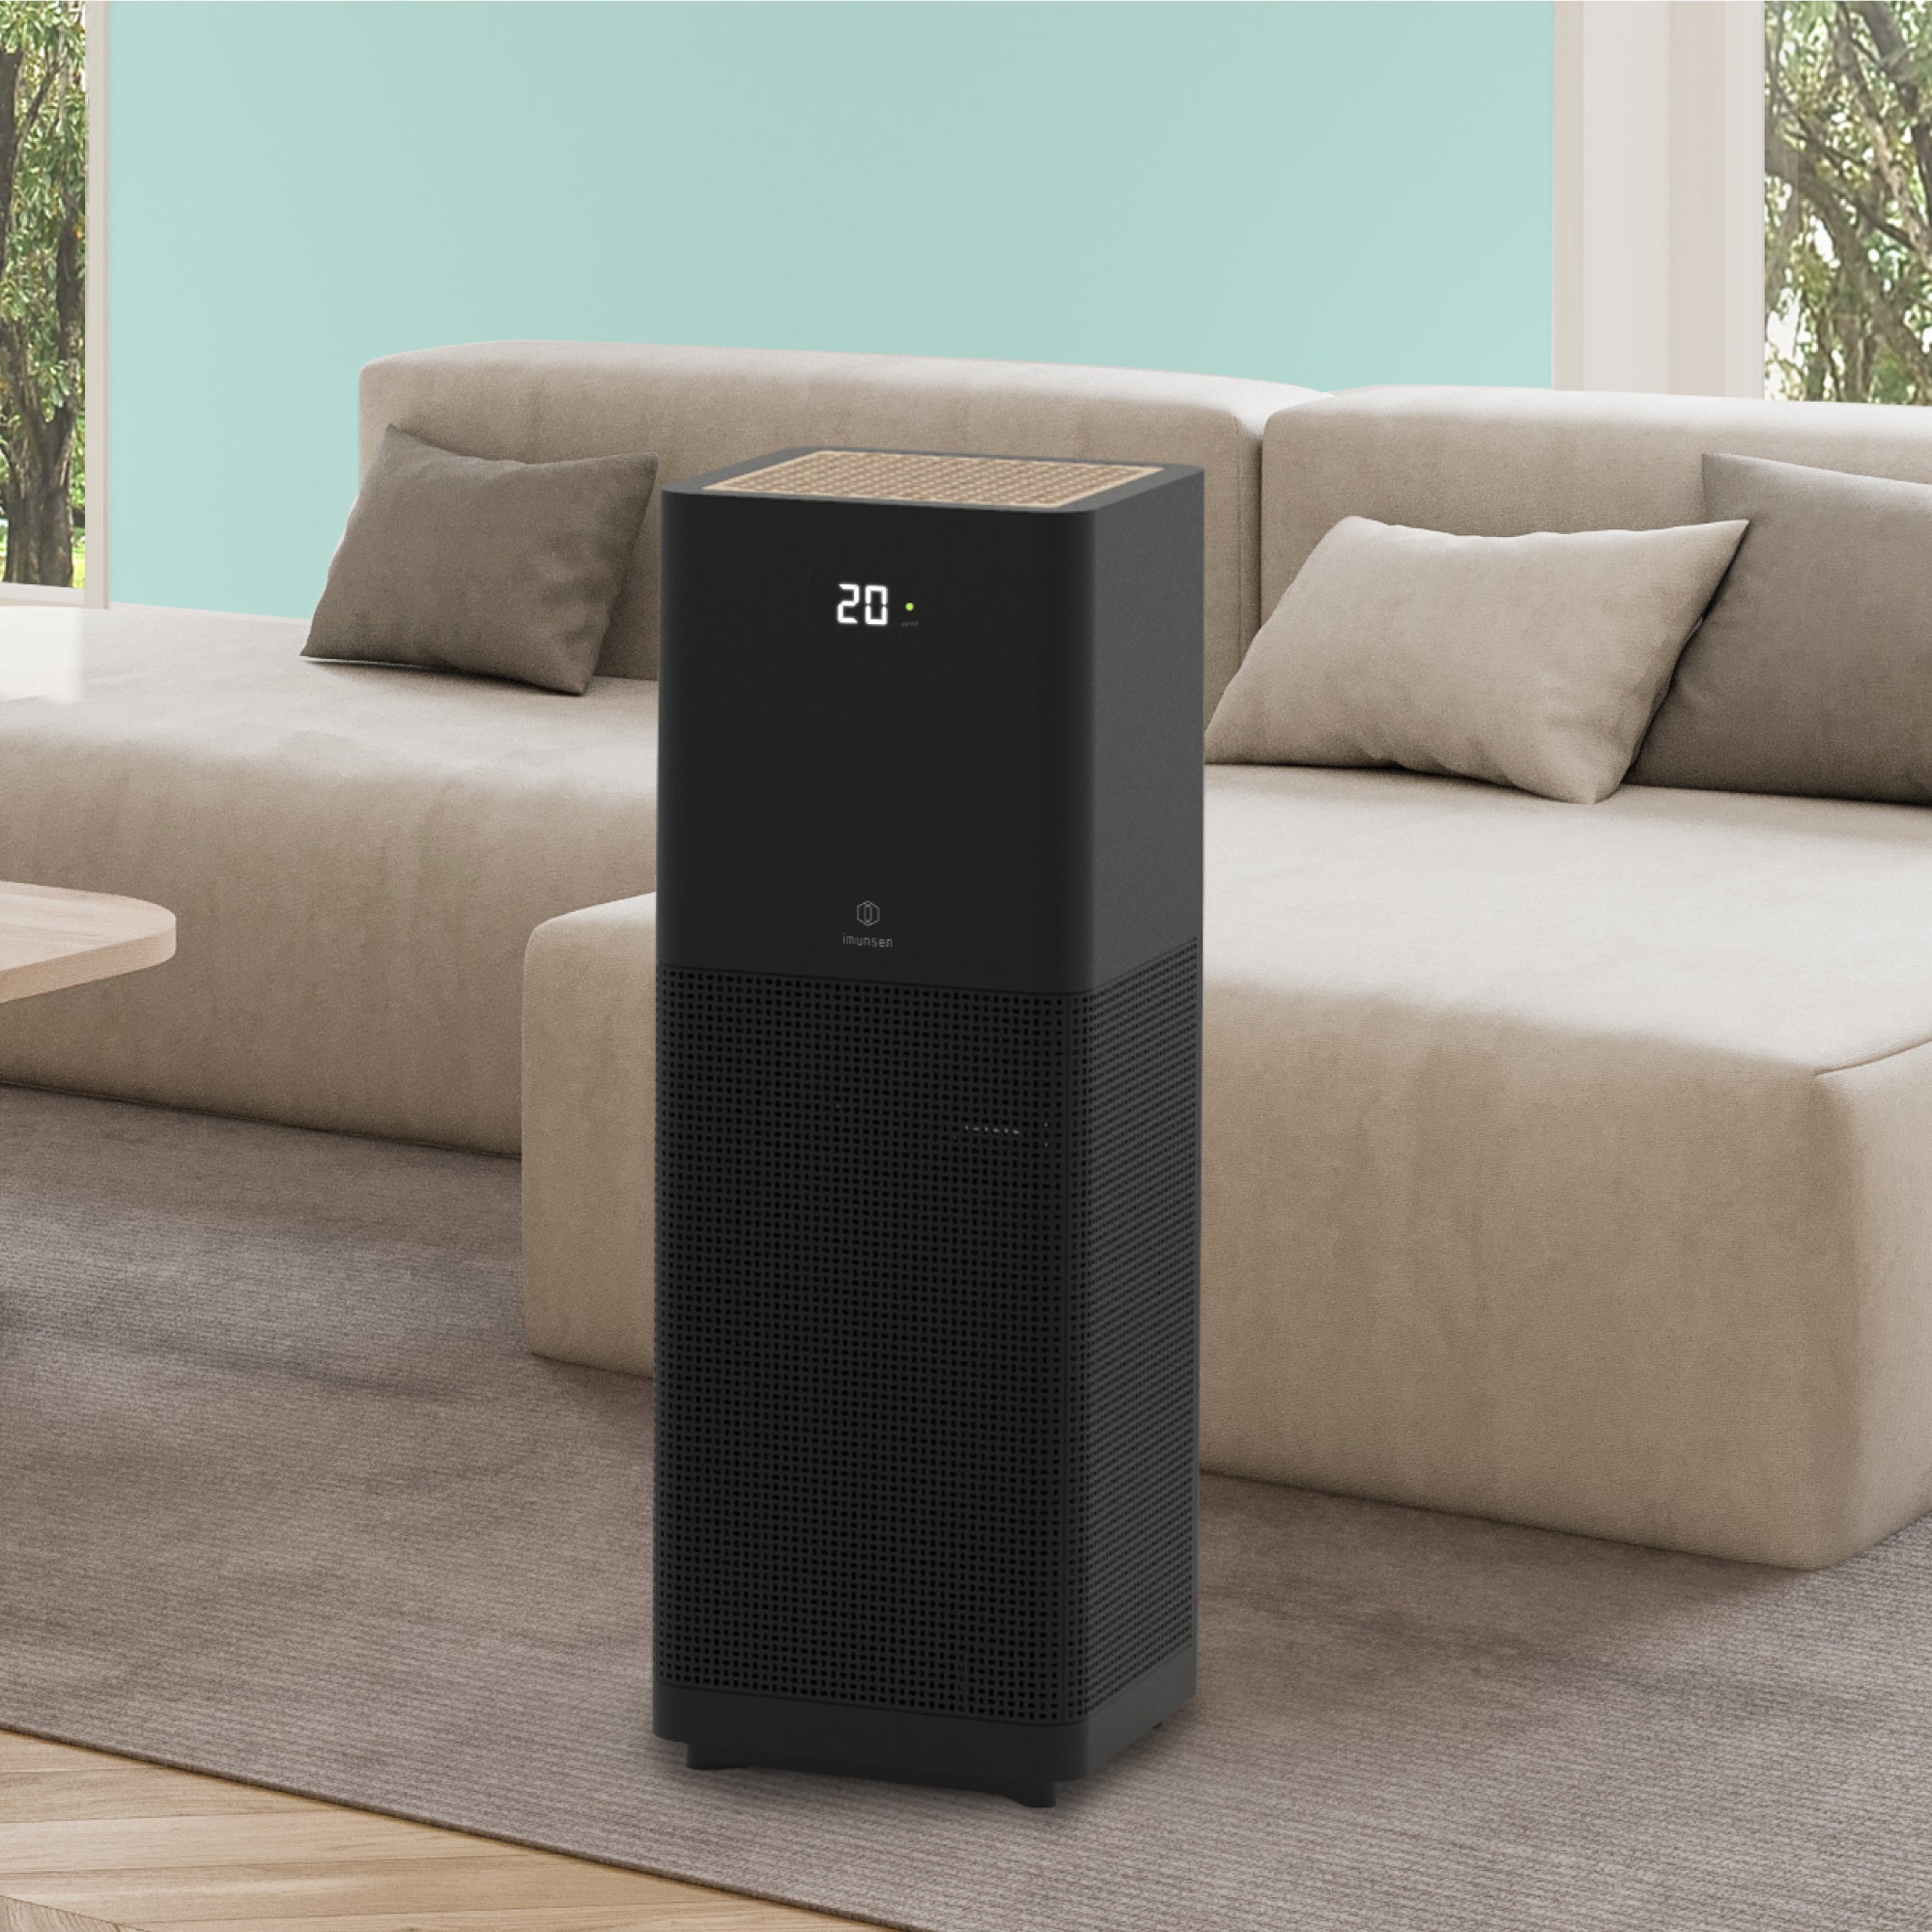 Air Purifier with Cypress Wood Combo For Large Area - 1 Black Air Purifier, 1 HEPA Filter, 1 Diffuser